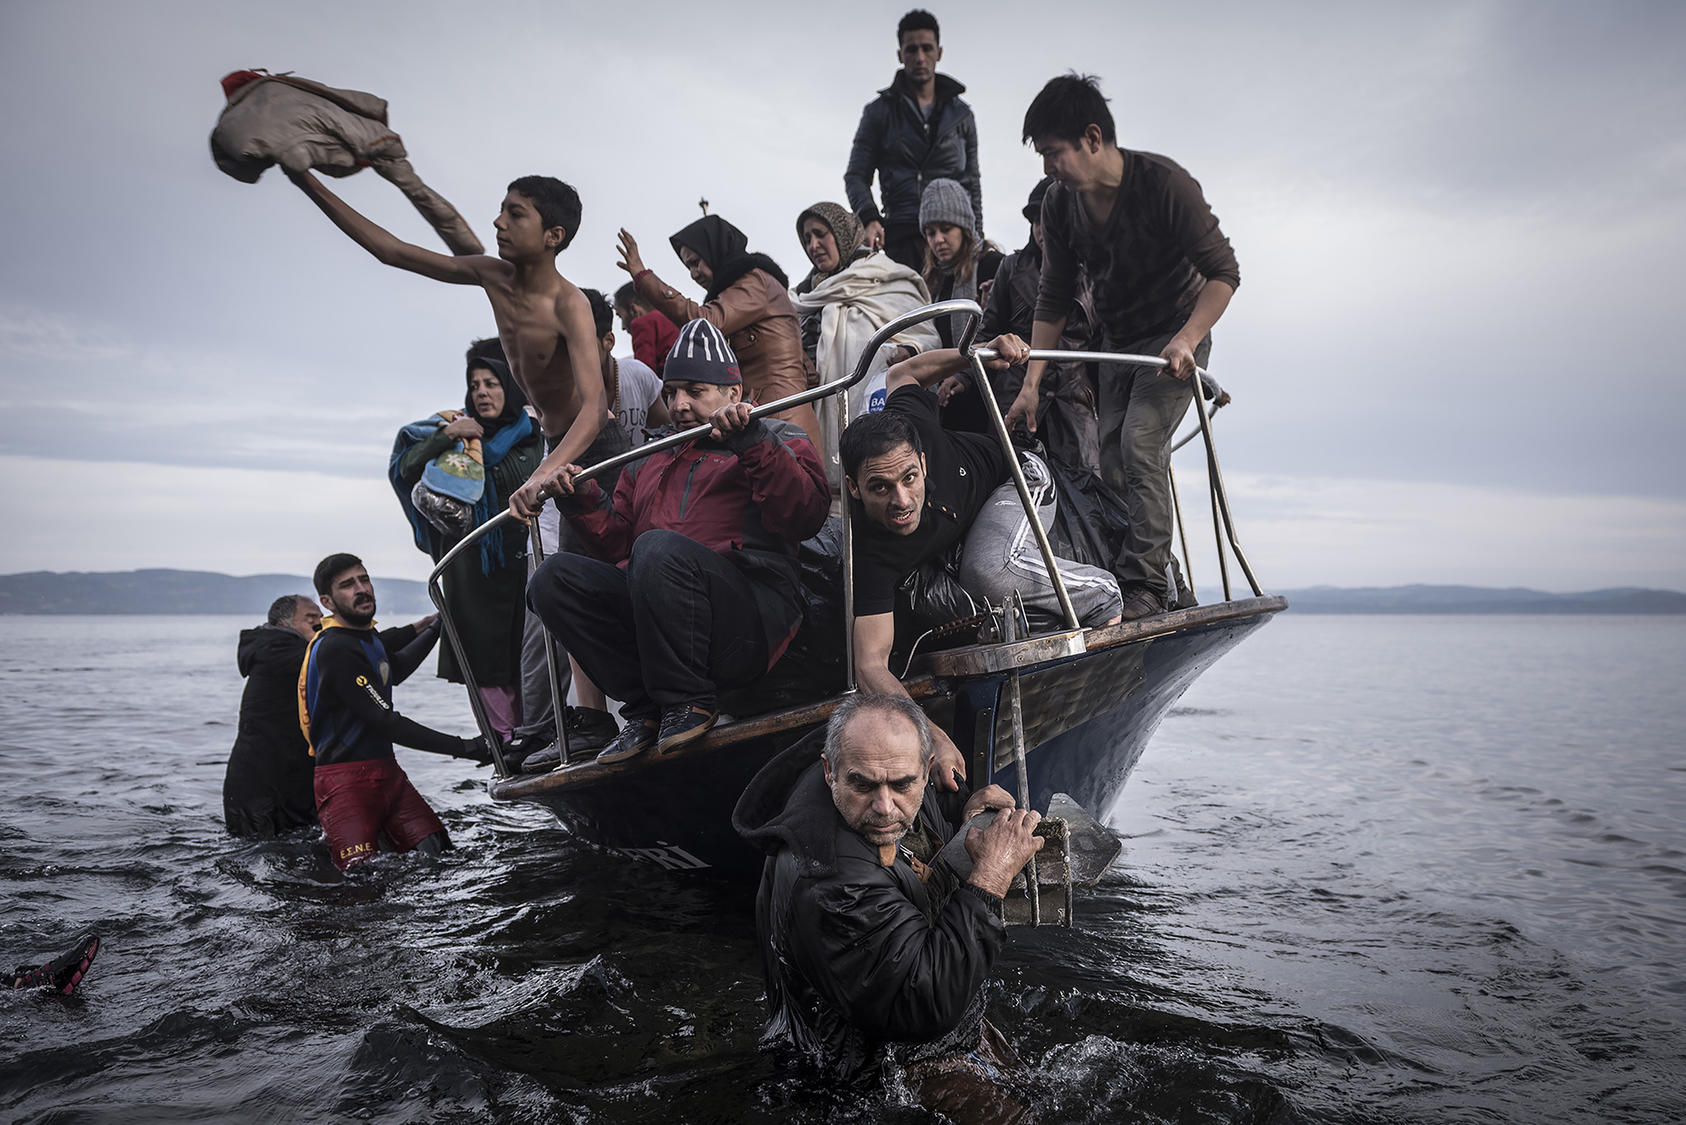 A small boat filled with migrants comes ashore after making the crossing from Turkey, near the village of Skala, on Lesbos island in Greece. Nov. 16, 2015. (Sergey Ponomarev/The New York Times)